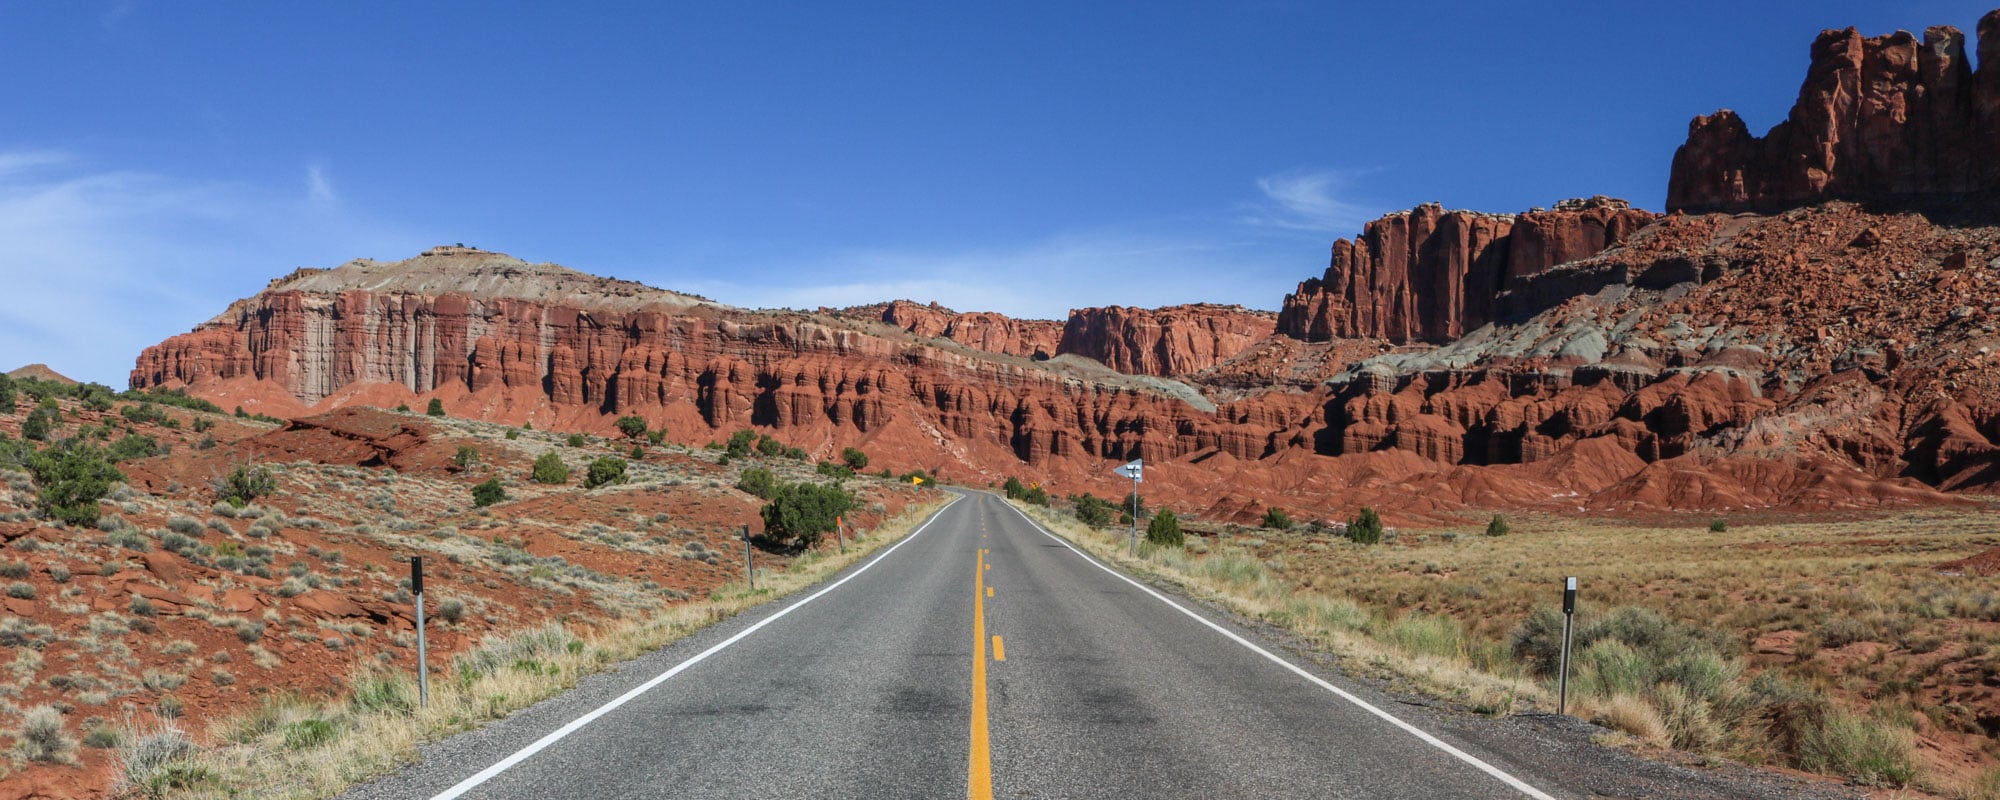 Best National Park Road Trips In The Usa The National Parks Experience